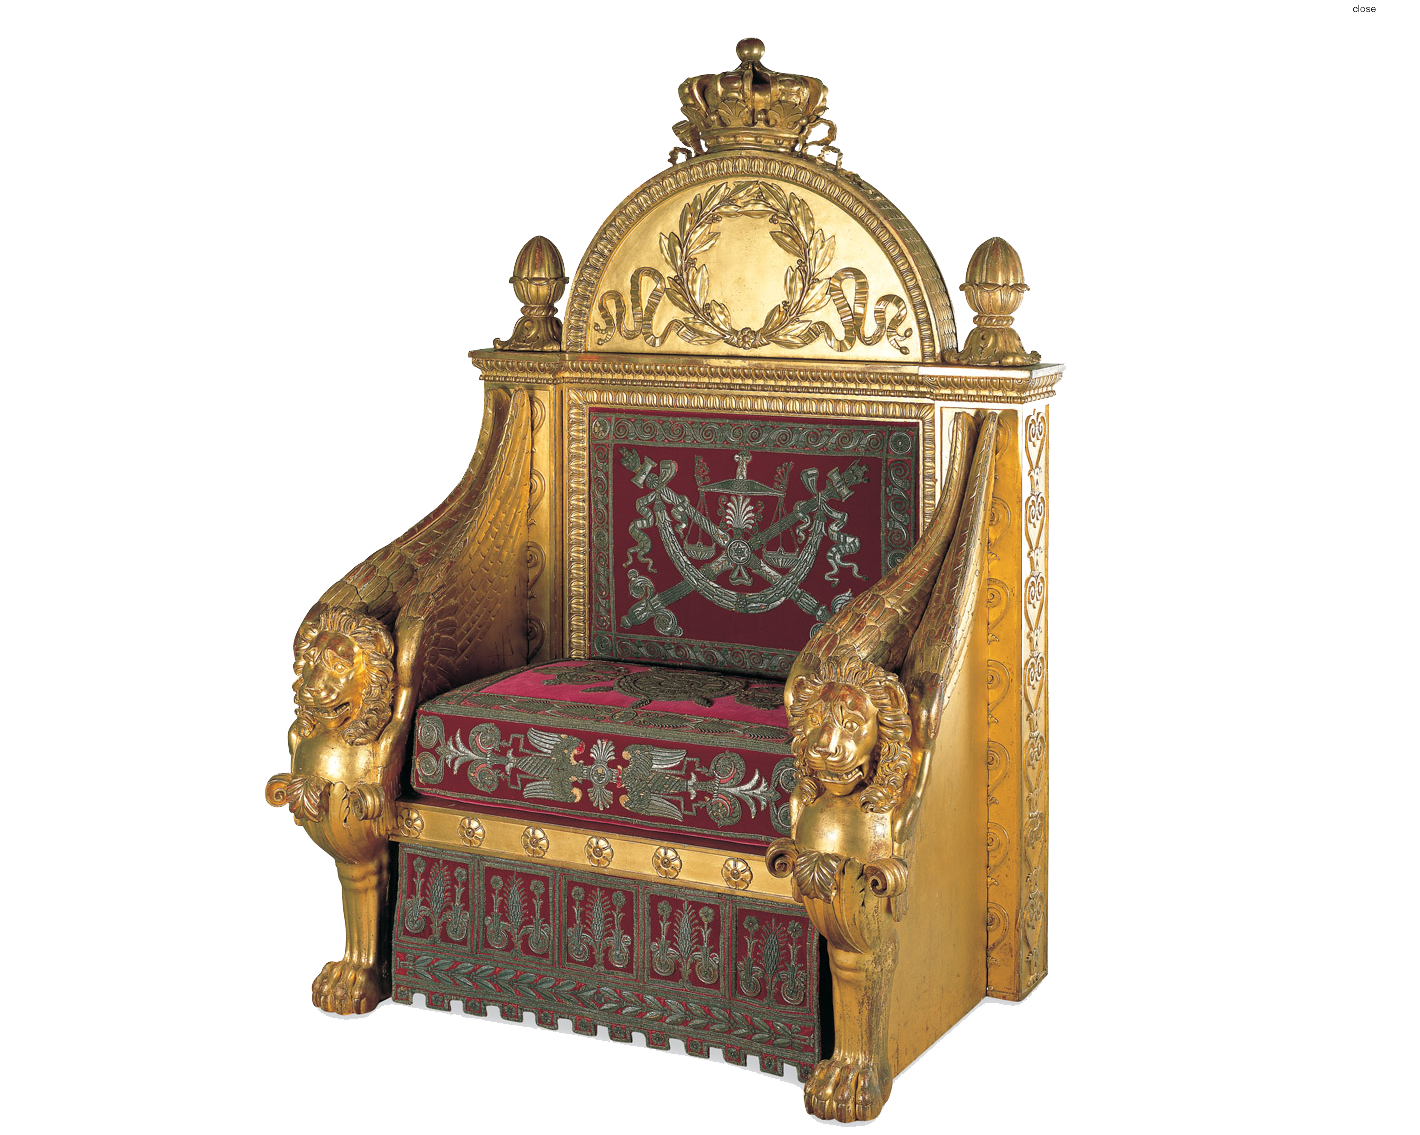 Throne PNG Image